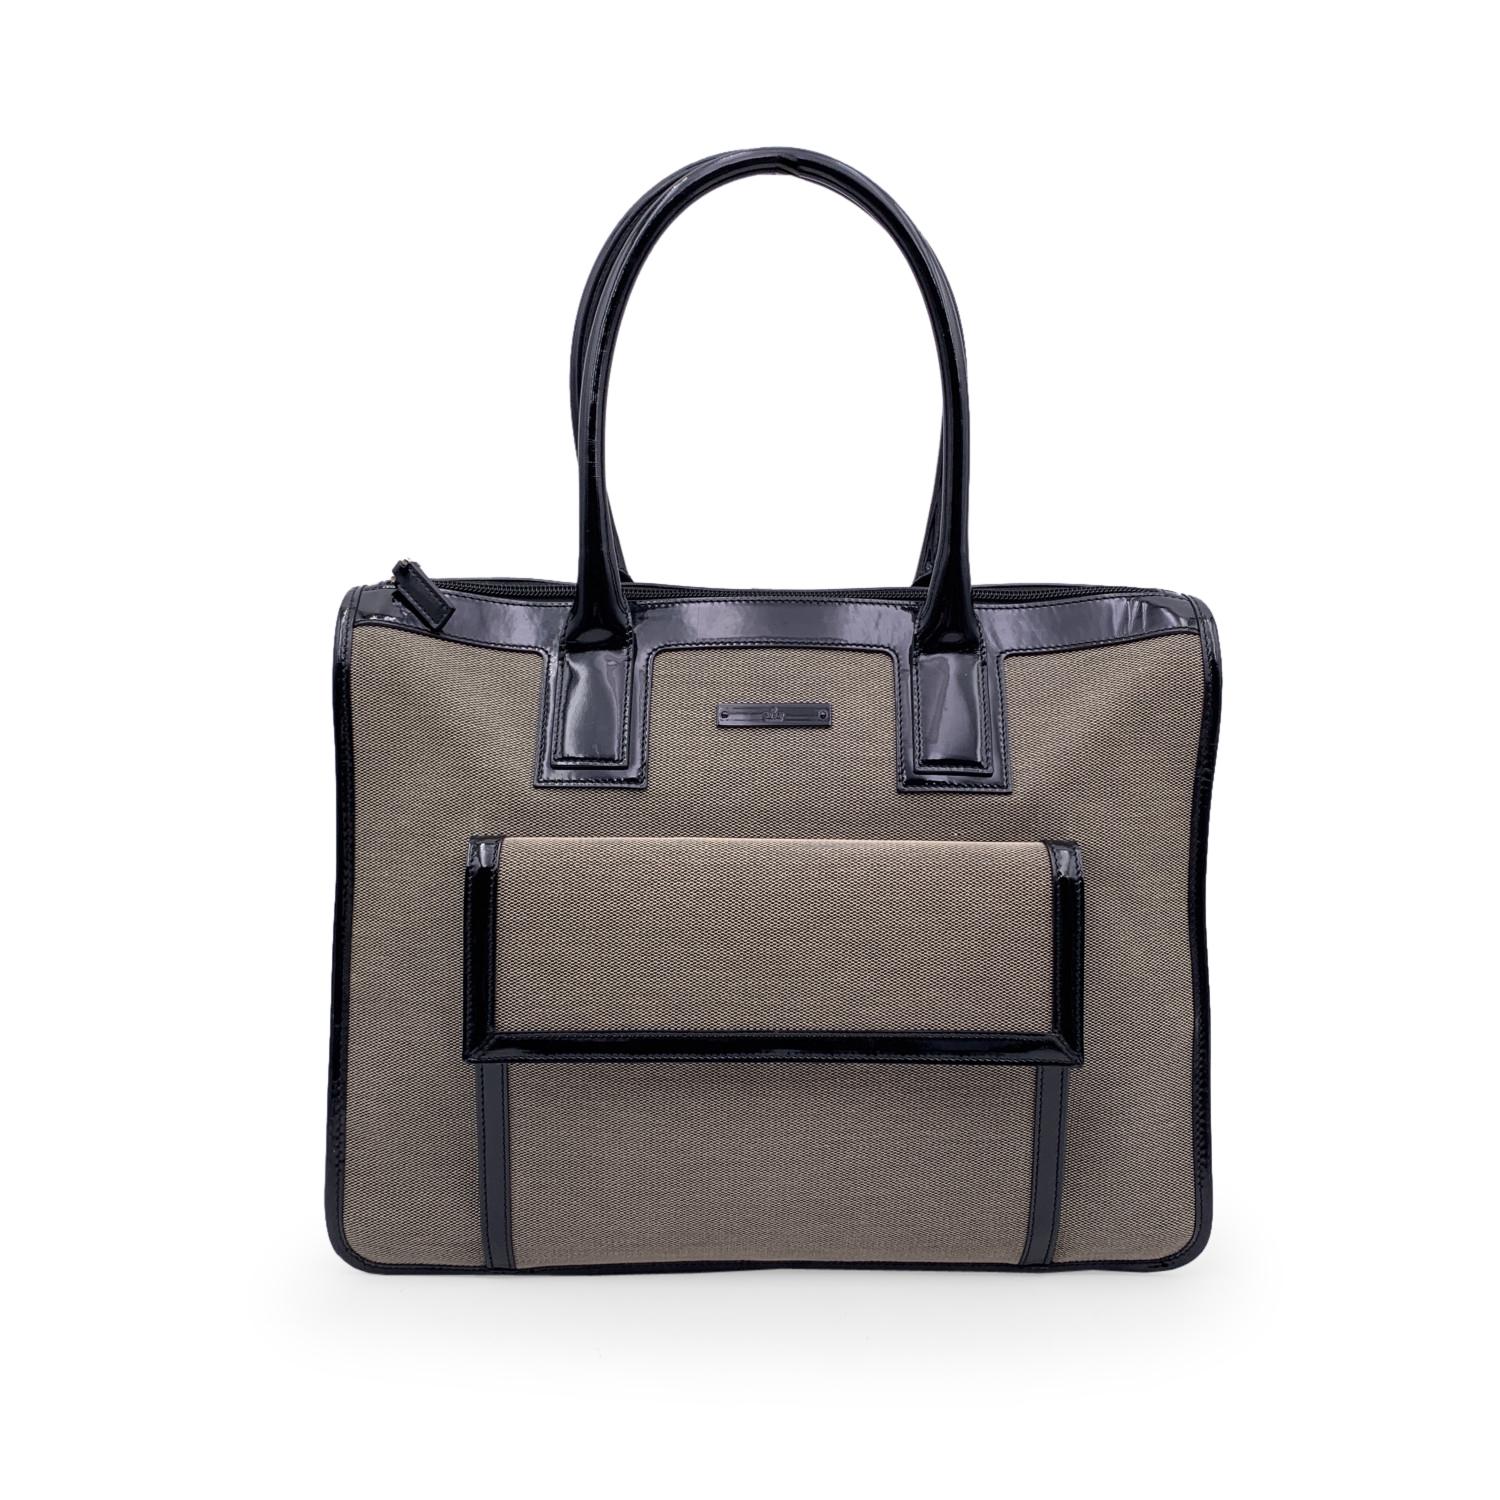 Beautiful Gucci satchel, crafted in beige canvas with black patent leather trim and handles. Front flap pocket. Upper zipper closure. Black fabric lining. 1 side zip pocket inside. 'Gucci - Made in Italy ' and serial number engraved